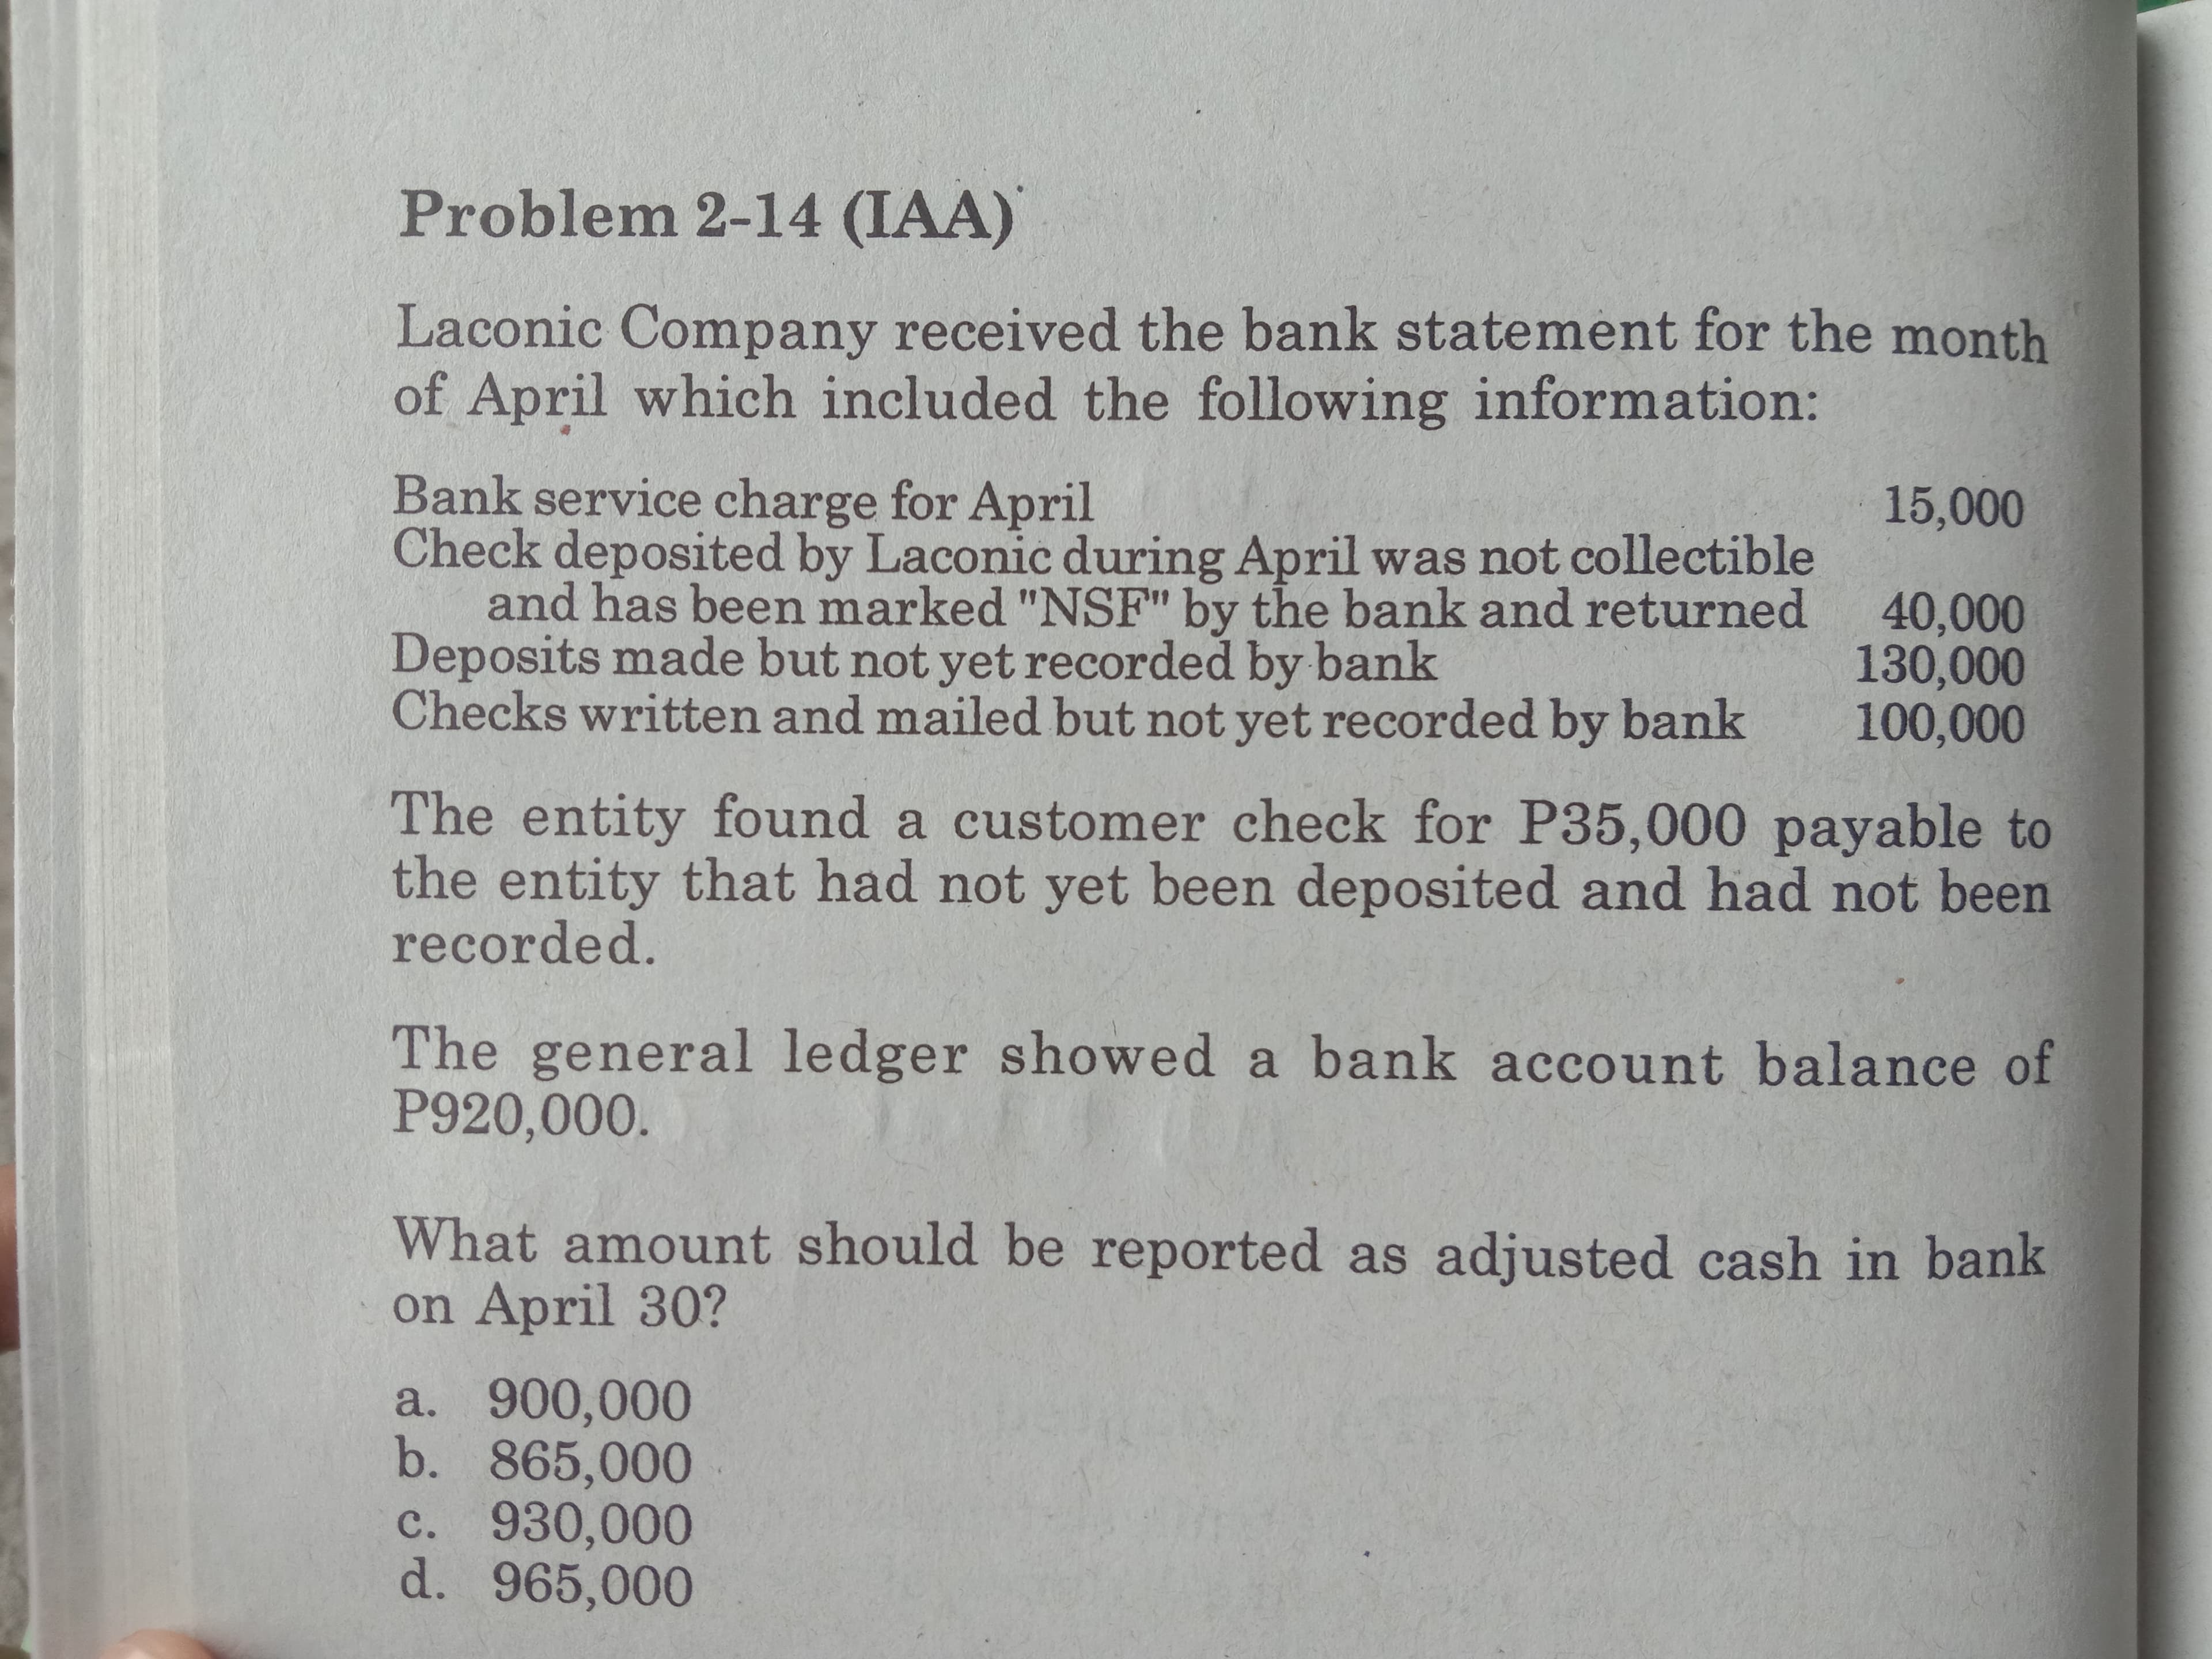 The general ledger showed a bank account balance of
P920,000.
What amount should be reported as adjusted cash in bank
on April 30?
a. 900,000
b. 865,000
c. 930,000
d. 965,000
с.
